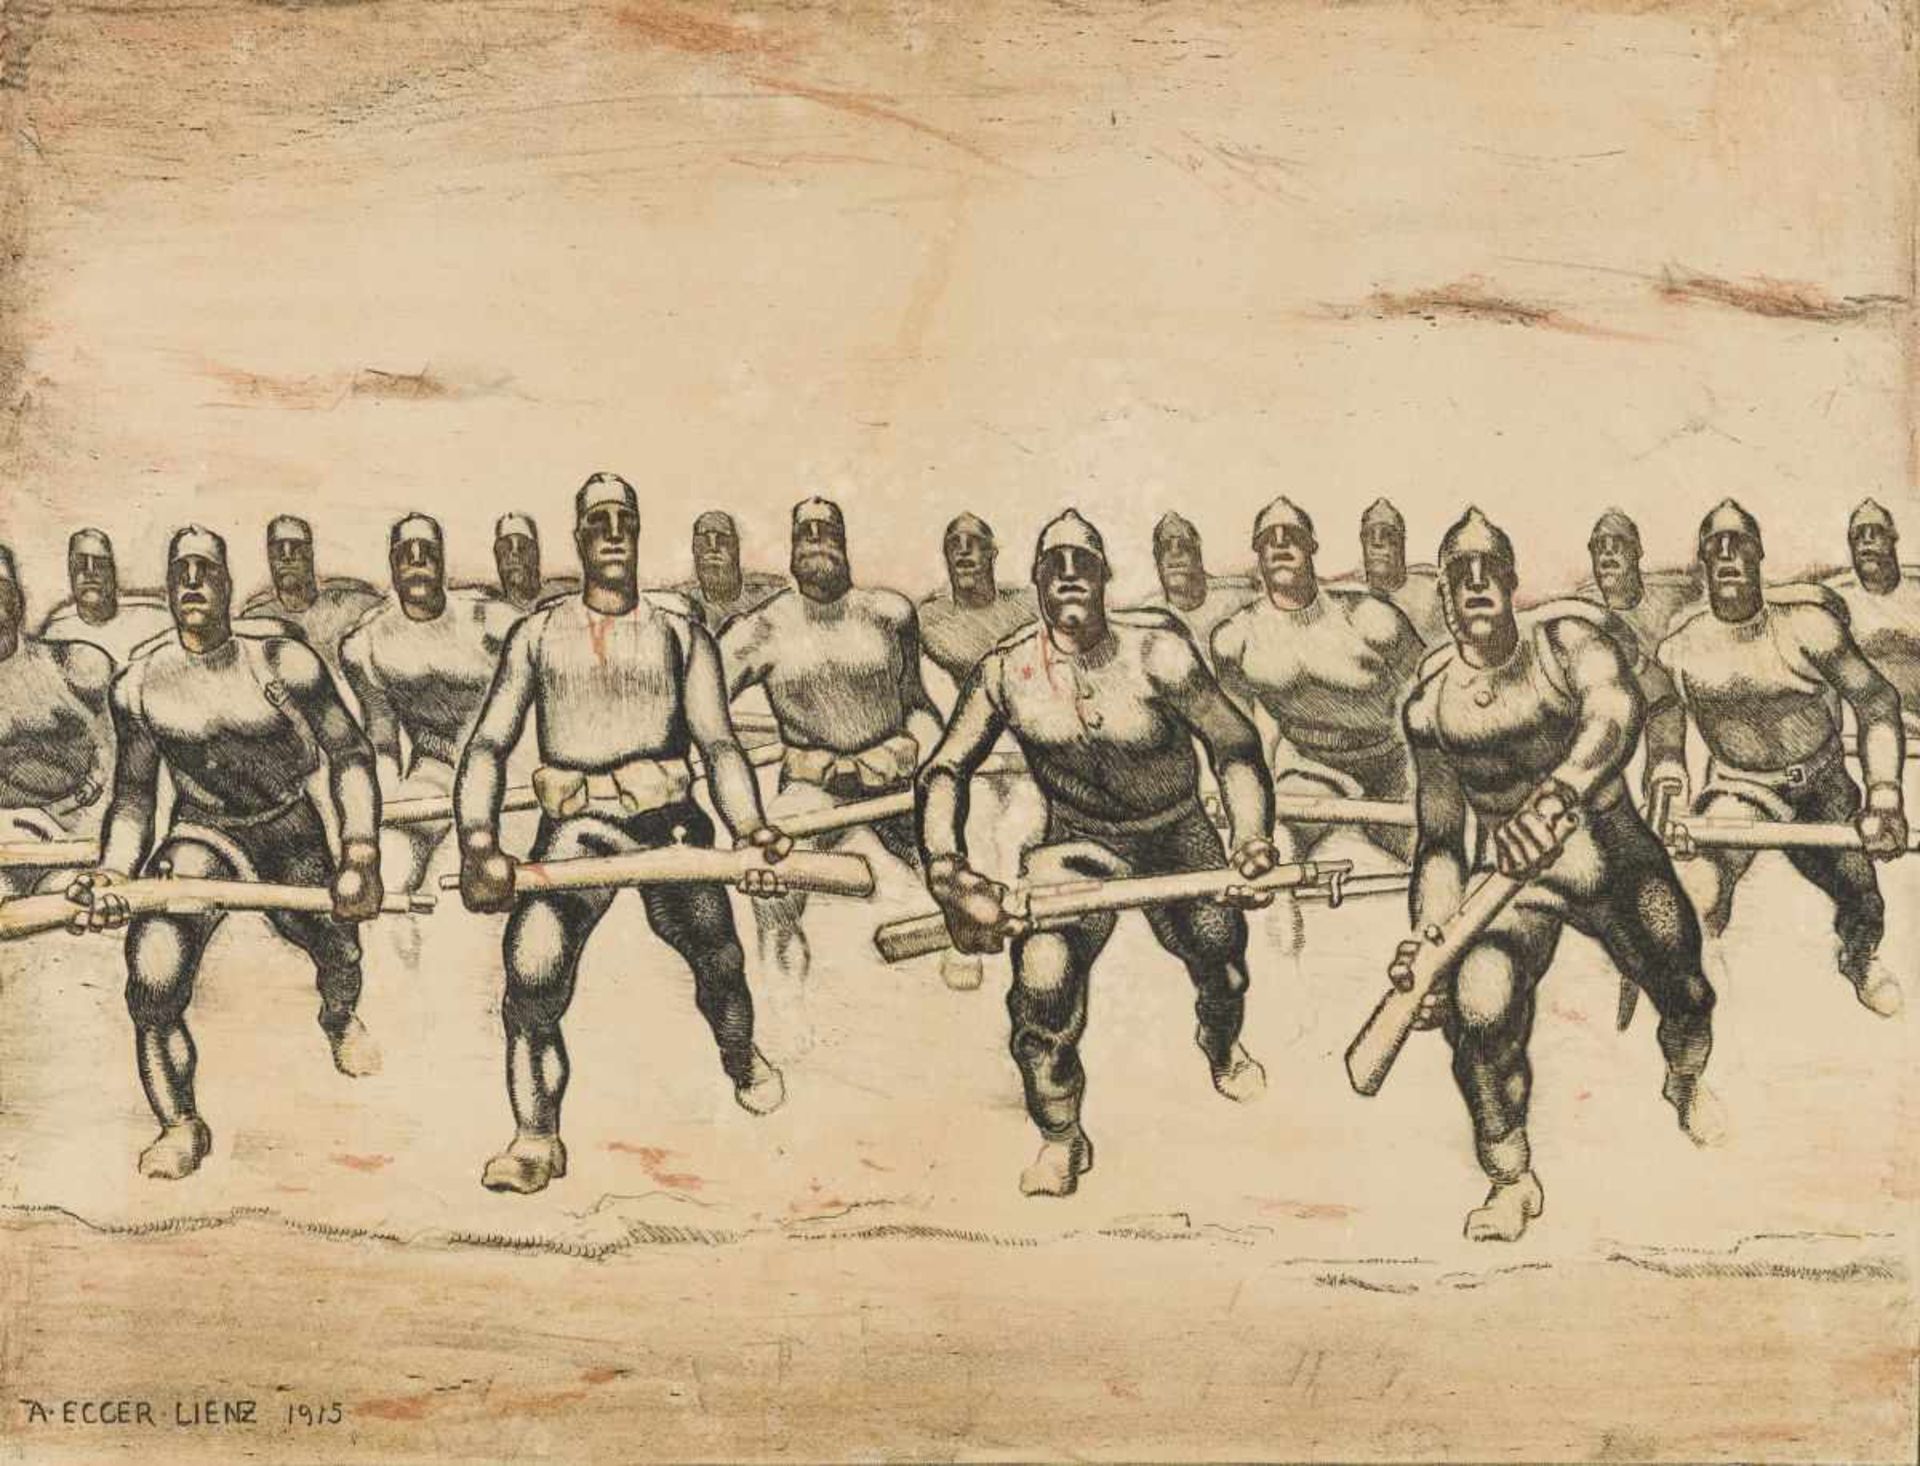 Egger-Lienz, AlbinSoldiers rushing forward, 1915Colored Lithographsigned and dated in the Stone